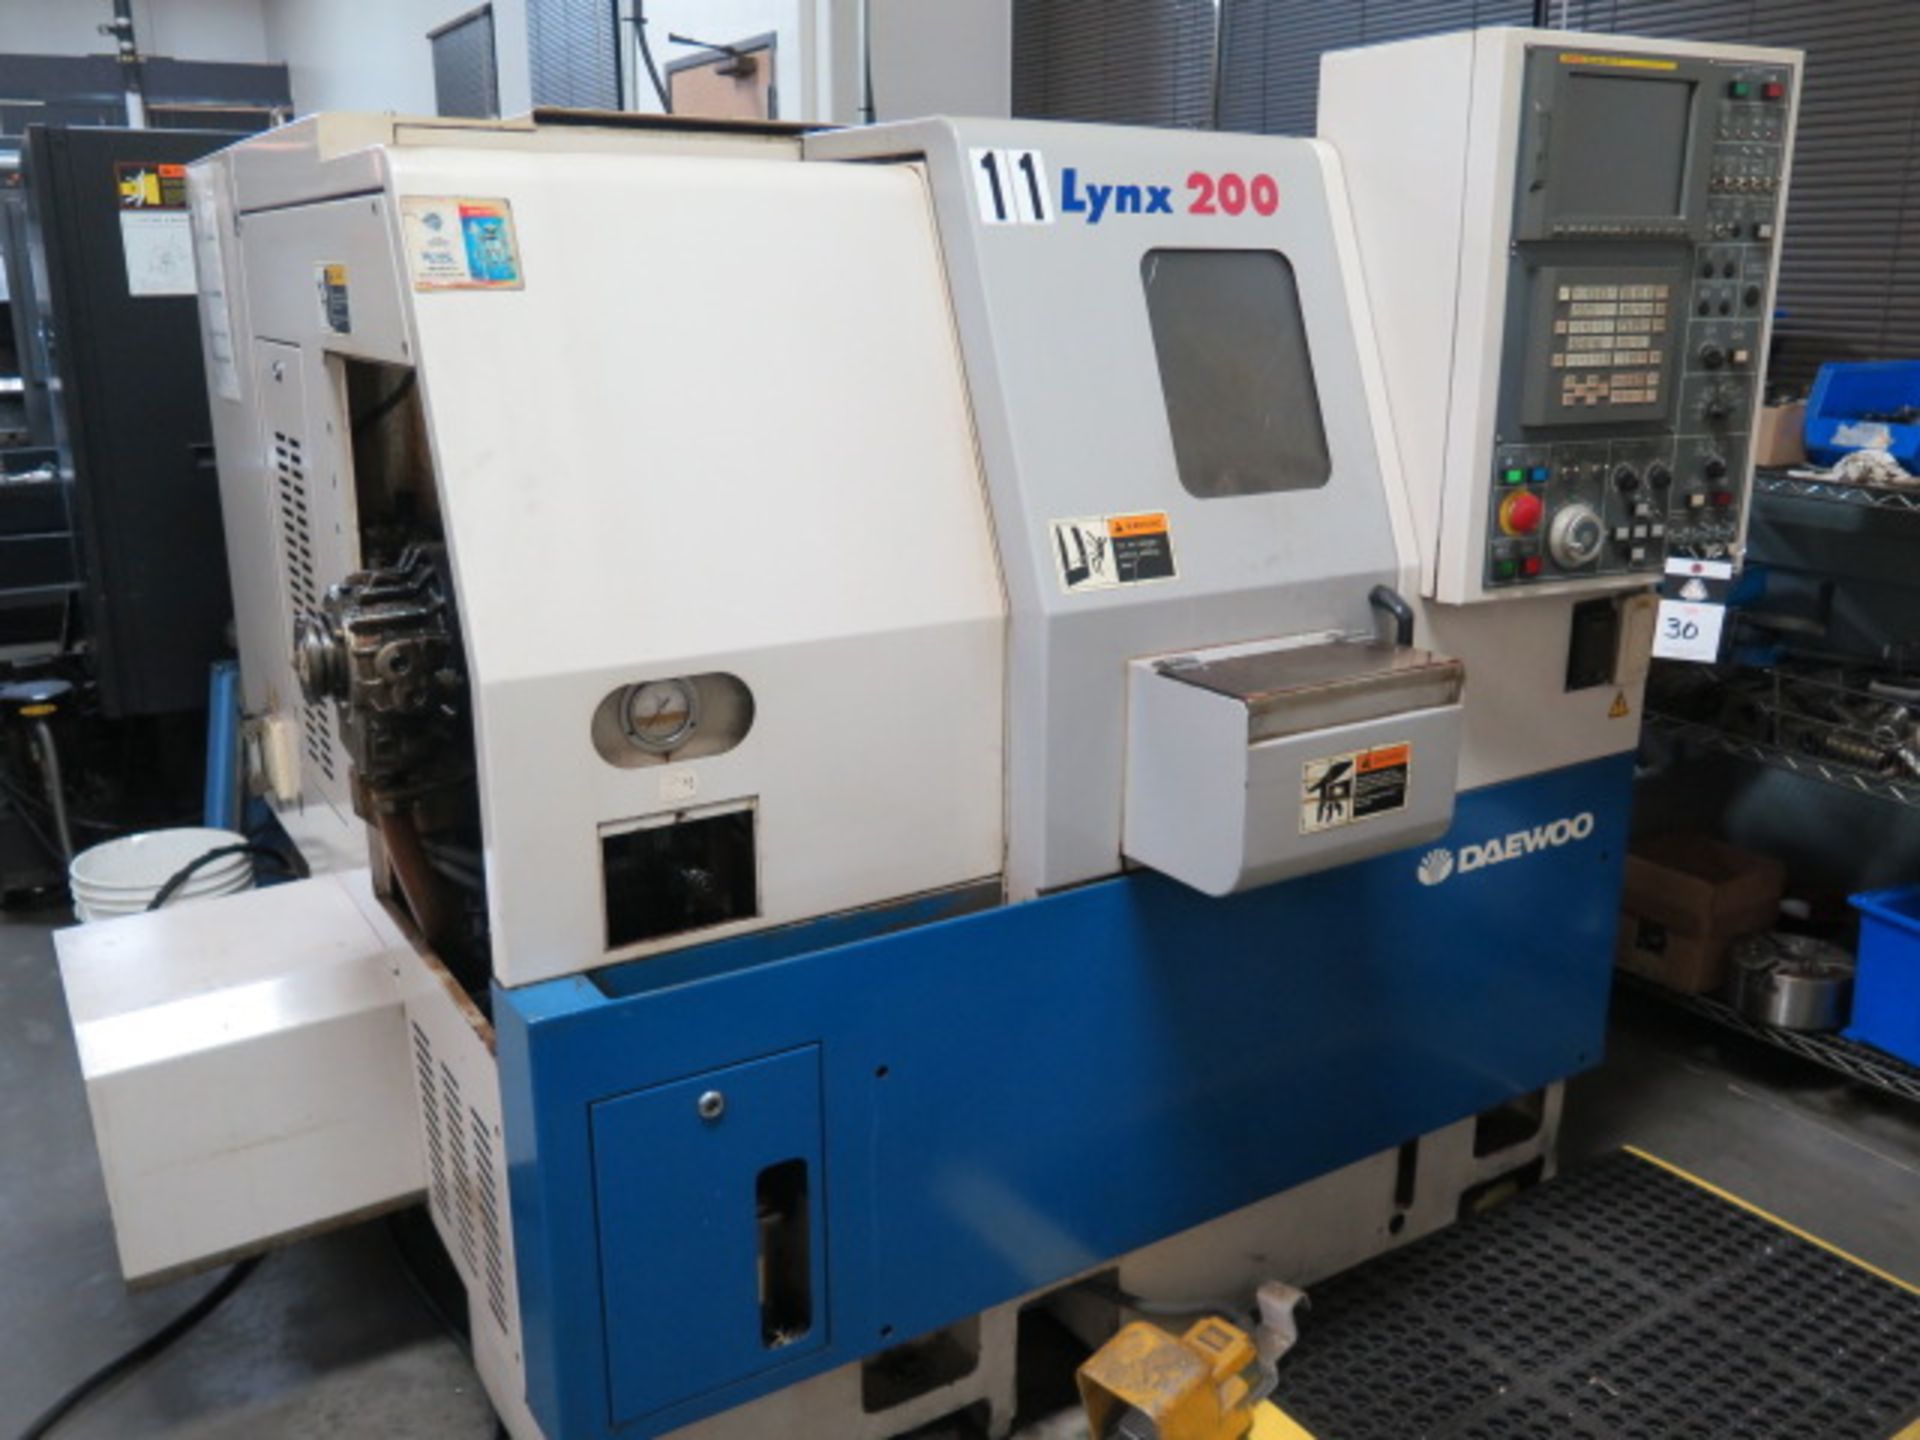 2000 Daewoo LYNX 200B CNC Turning Center s/n L2001751 w/ Fanuc Series 21i-T Controls, SOLD AS IS - Image 3 of 14